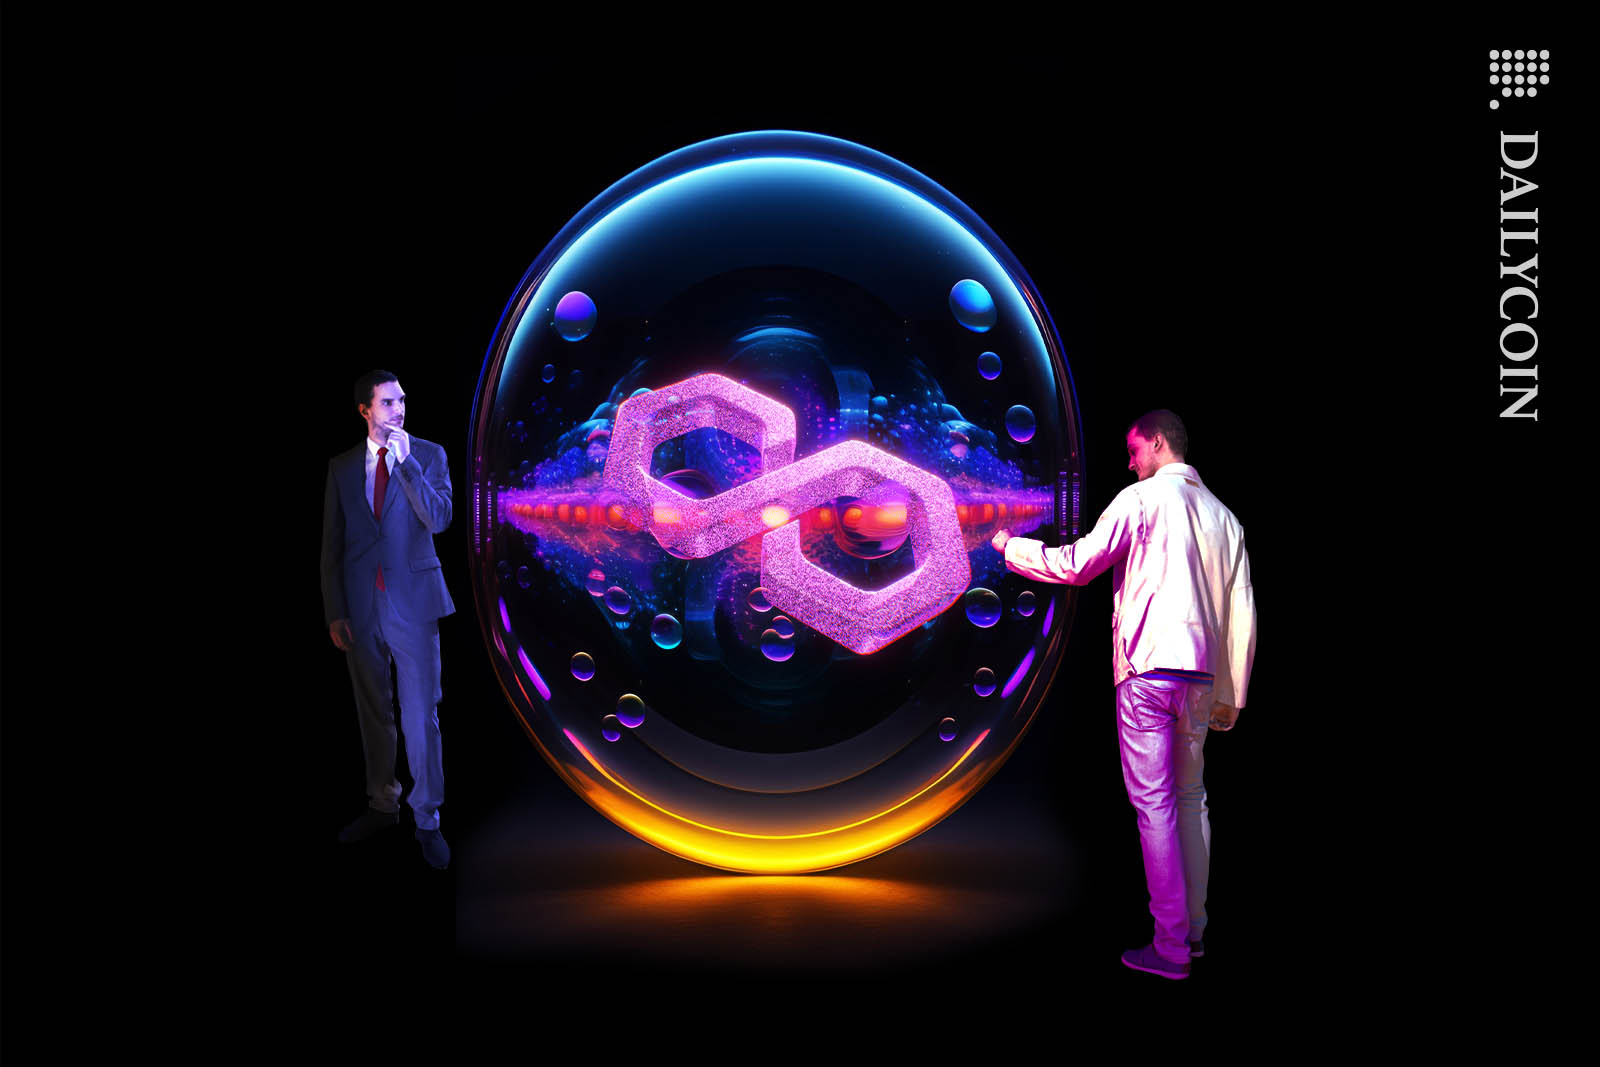 2 men examining an unidentified glowing bubble object with a Polygon logo in the middle.